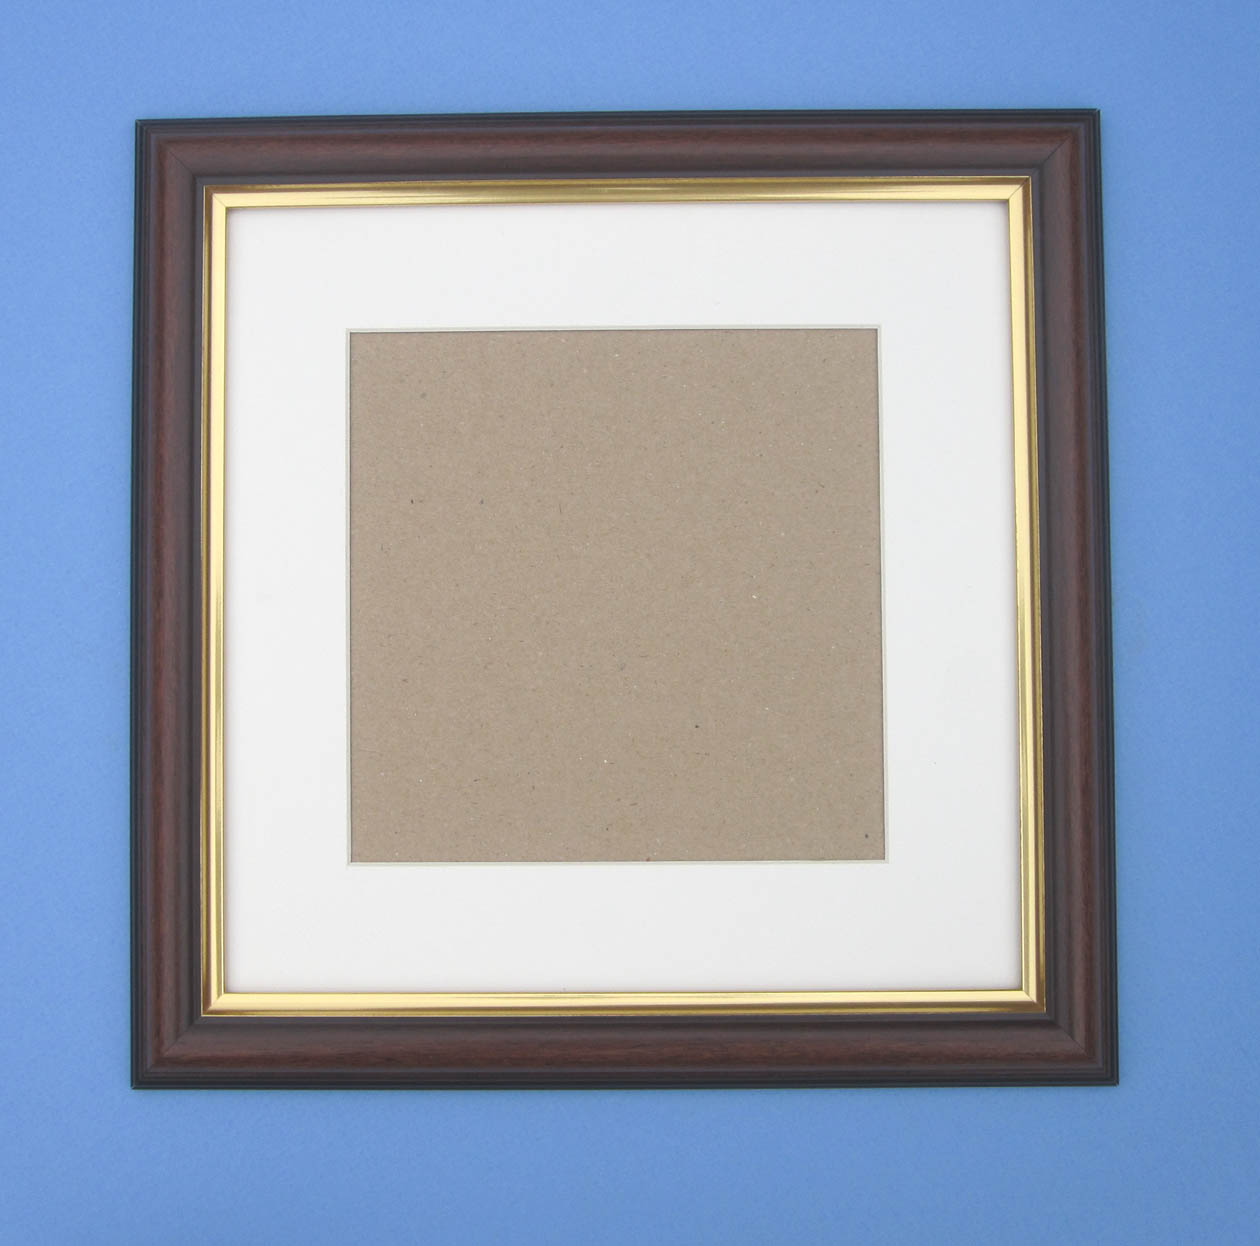 Small Square Wooden Frames